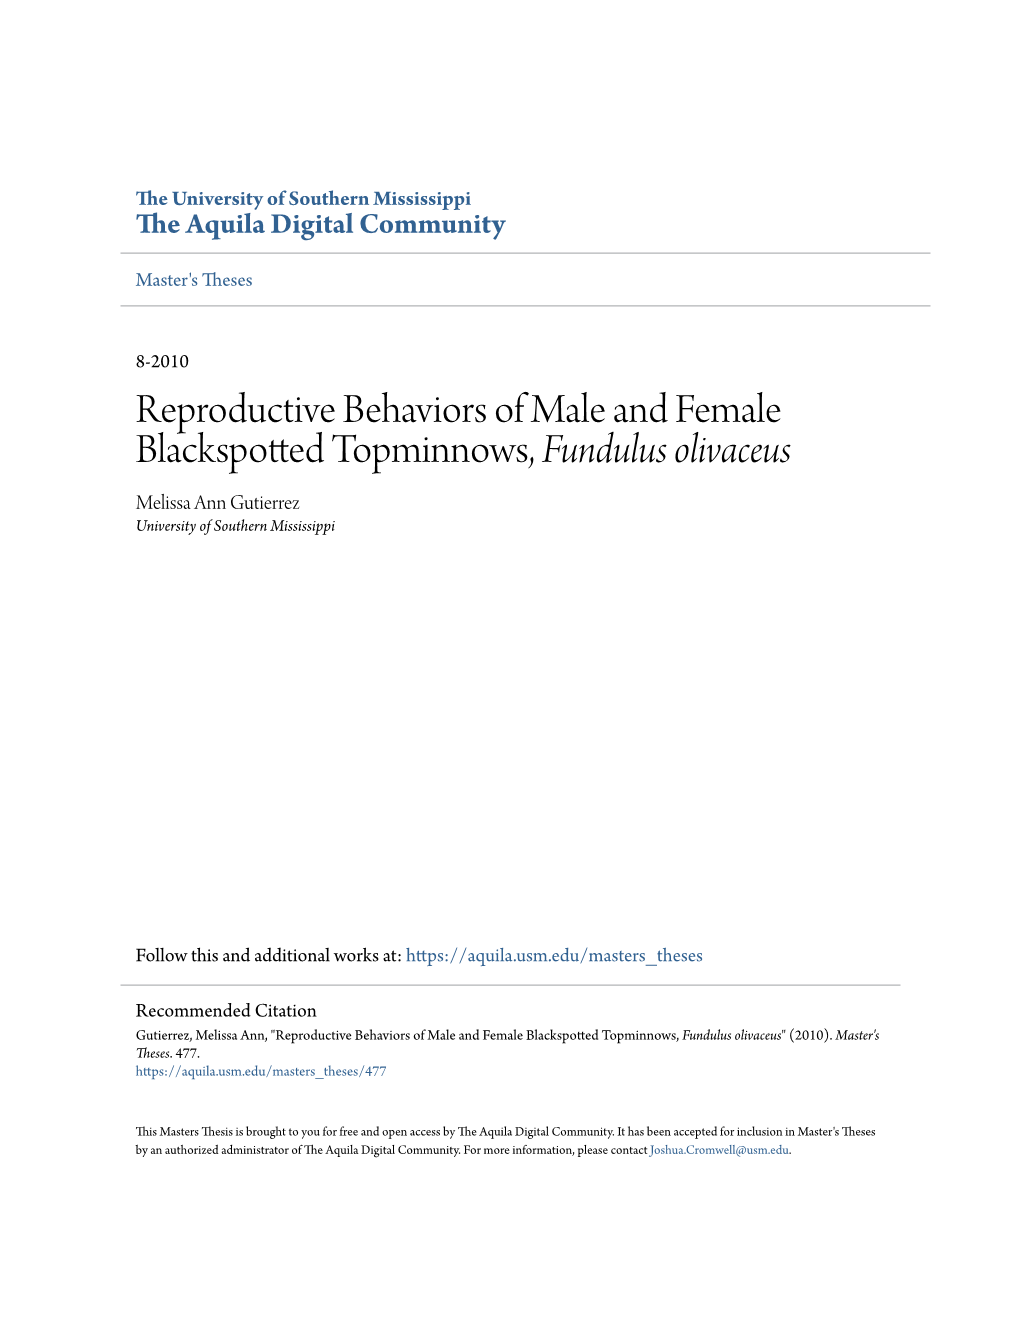 Reproductive Behaviors of Male and Female Blackspotted Topminnows, Fundulus Olivaceus Melissa Ann Gutierrez University of Southern Mississippi